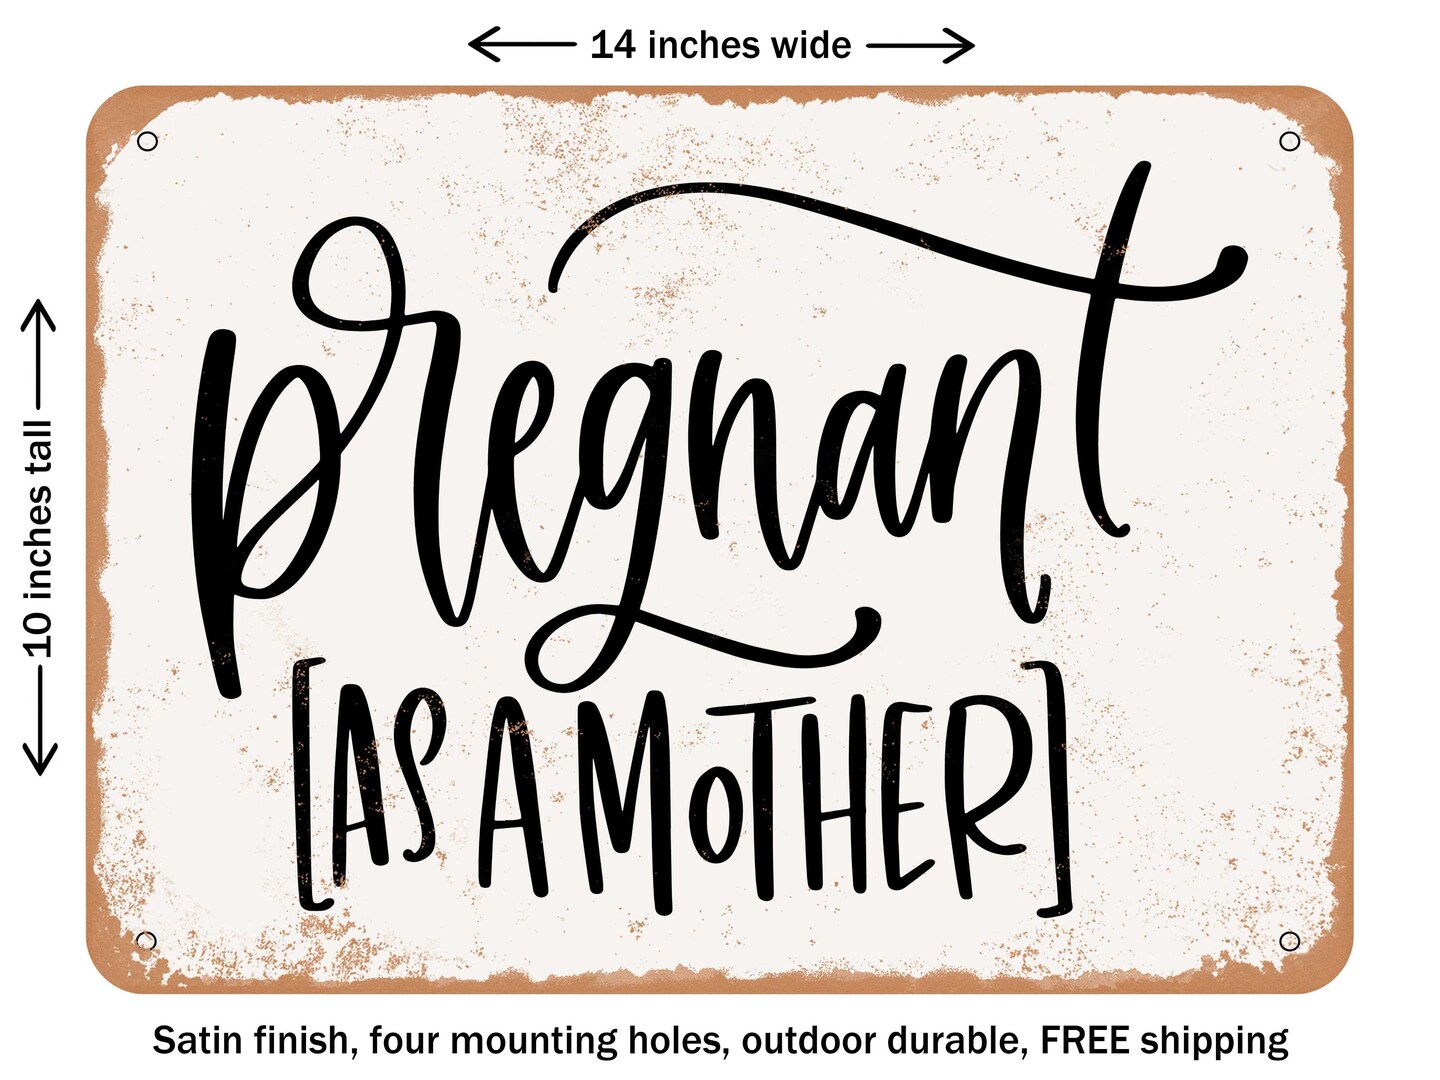 DECORATIVE METAL SIGN - Pregnant As a Mother - 2 - Vintage Rusty Look